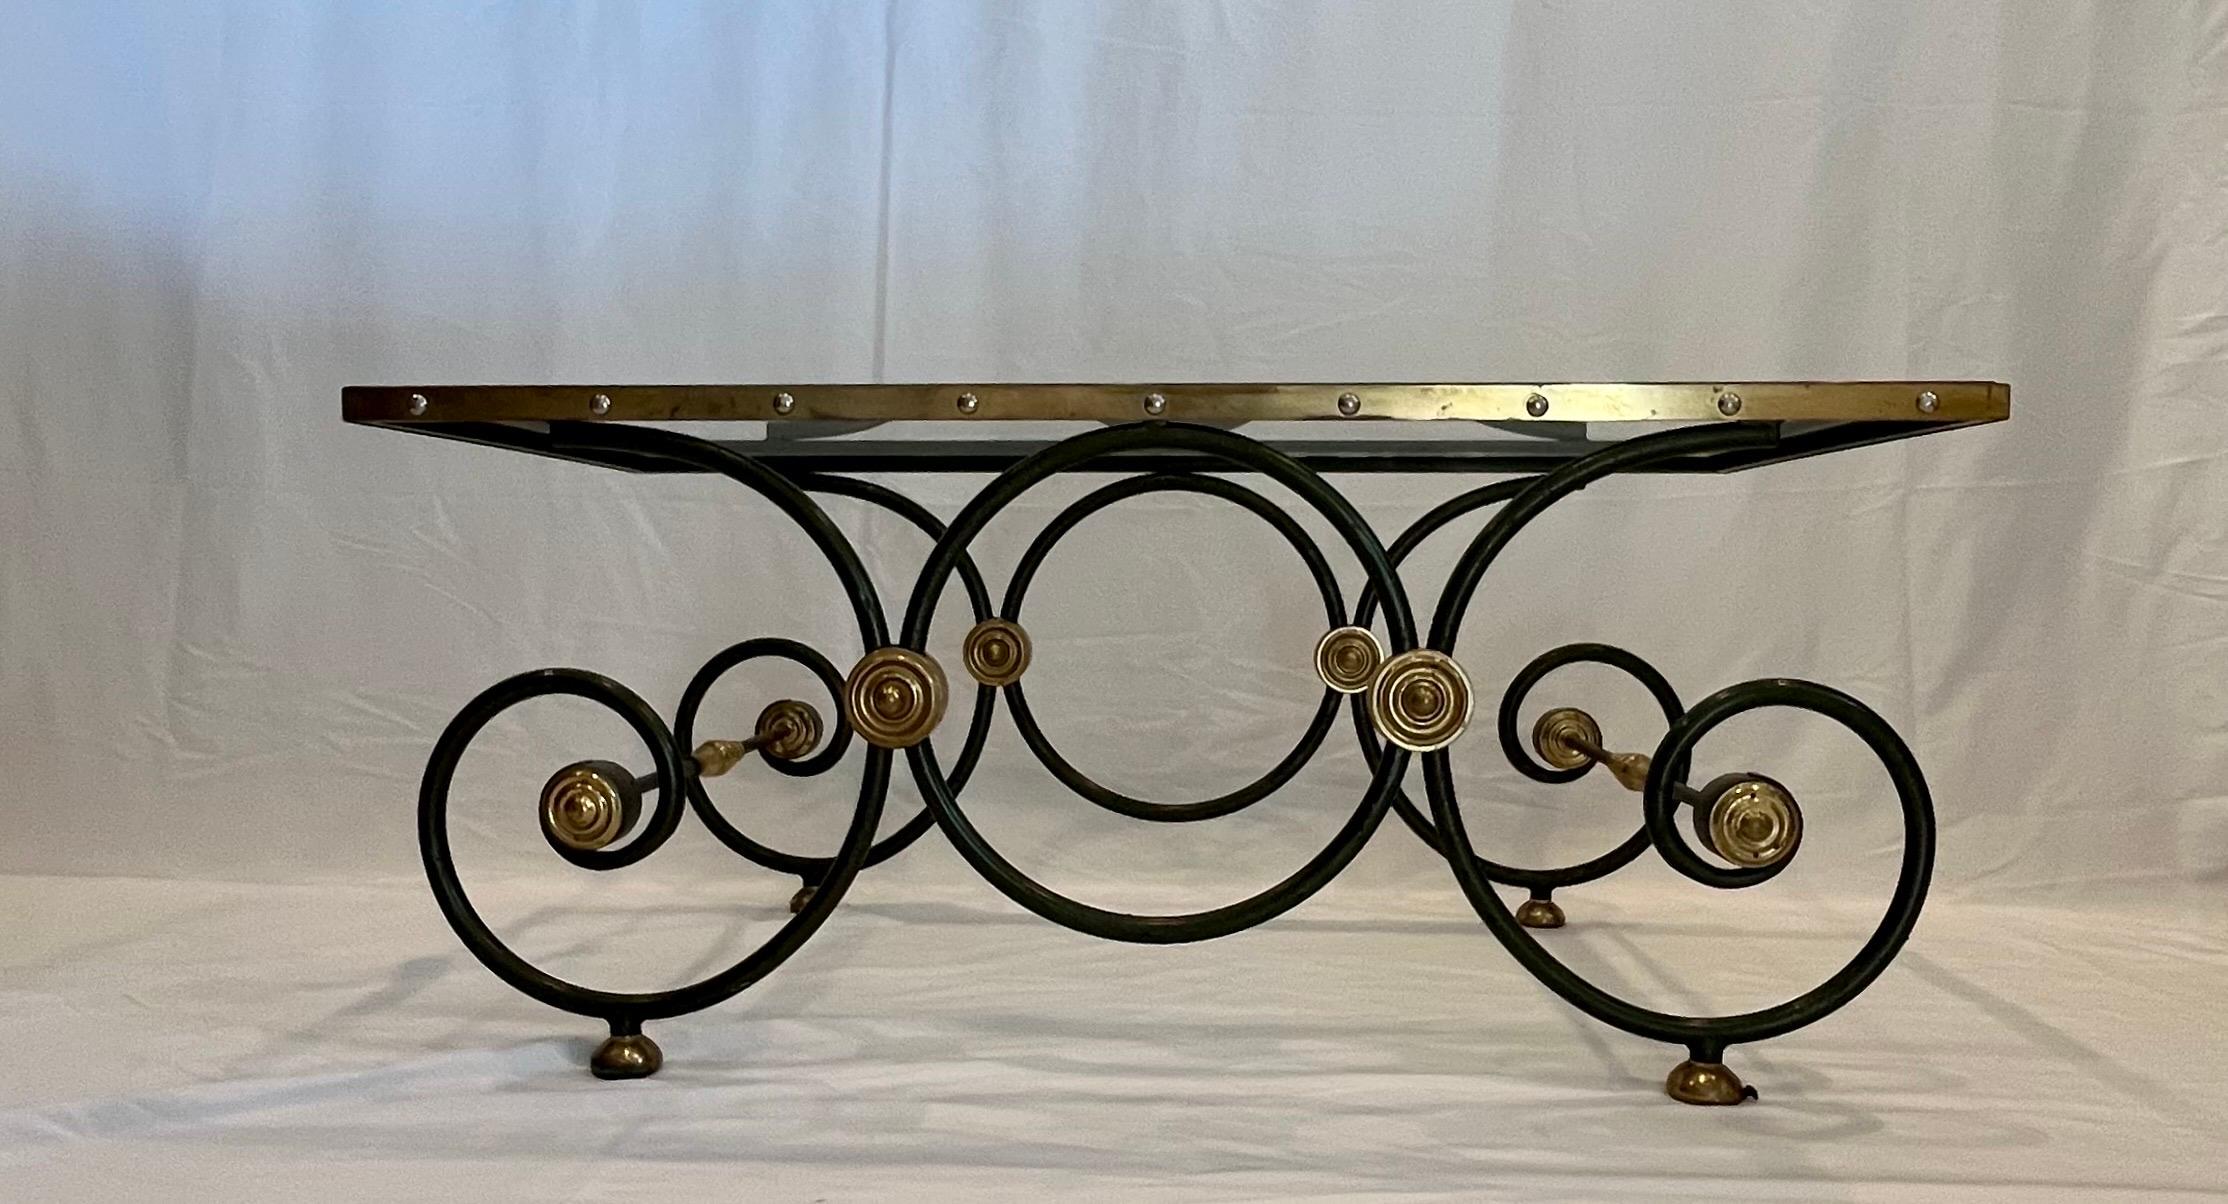 Stunning French Hollywood Regency low table, circa 1950s-1960s. This striking table is designed with a scrolling wrought iron base, a glass top sits in brass gallery with chrome stud caps. Green painted patina. Brass lettuce cup medallions.
Curbside